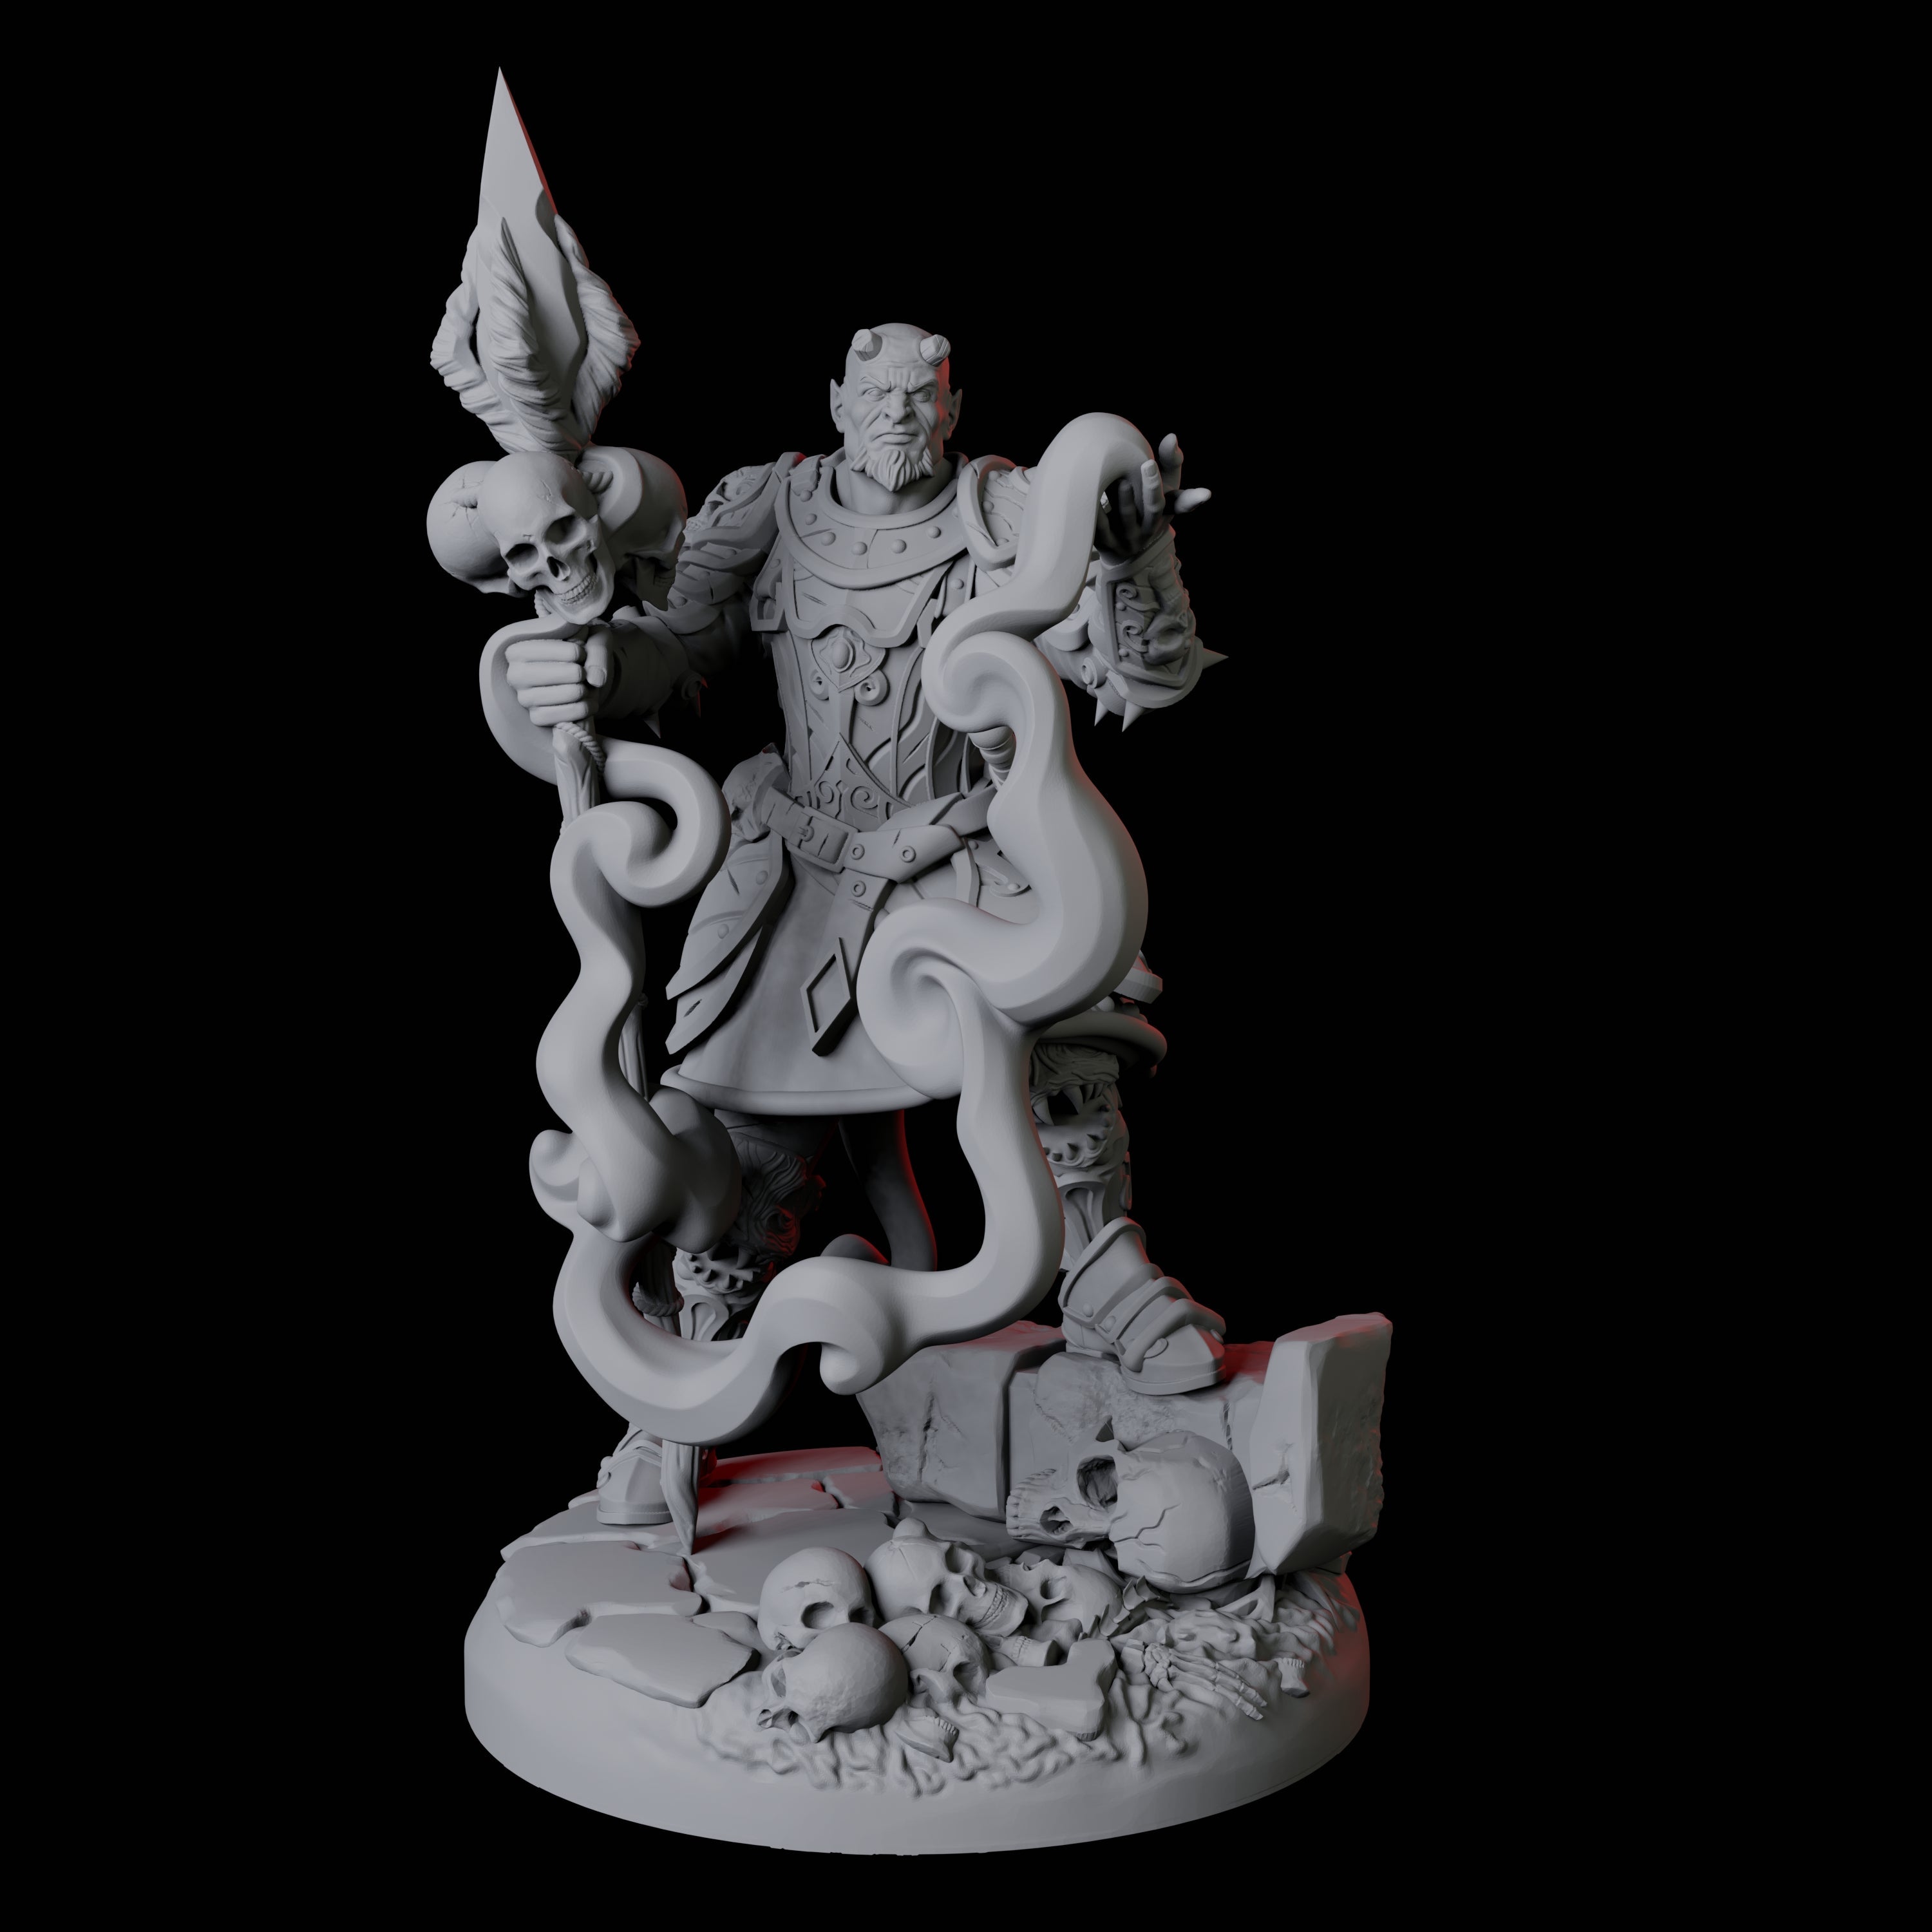 Threatening Bearded Devil D Miniature for Dungeons and Dragons, Pathfinder or other TTRPGs